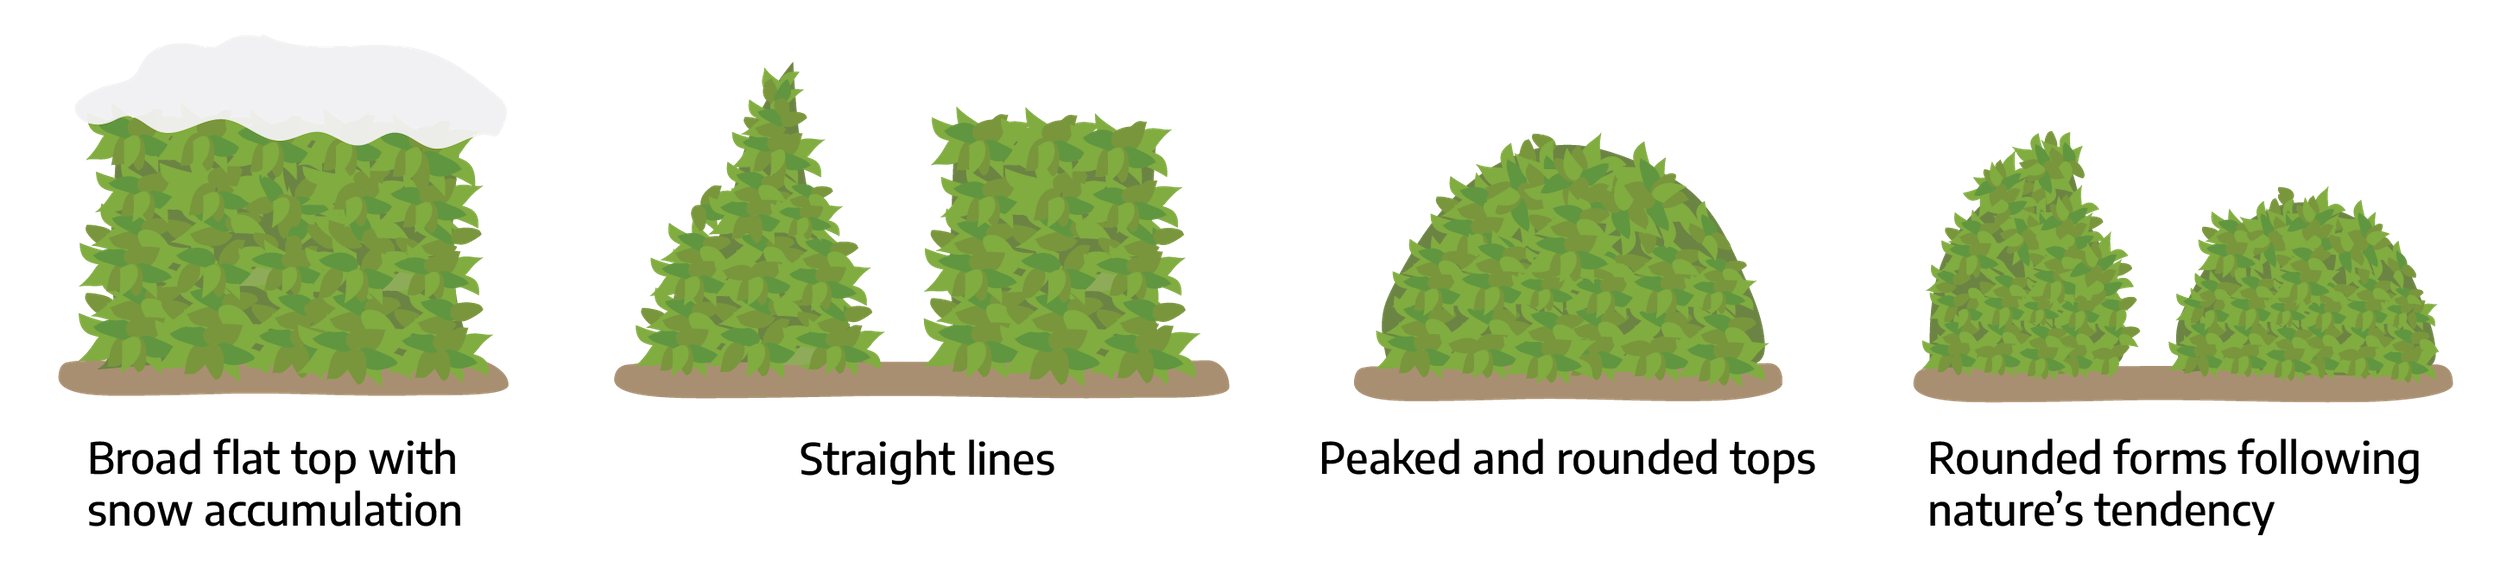 Four cartoon drawings of shrubs with green growth. The first is "broad flat top with snow accumulation," a square shape. The second is "straight lines"; one is a triangular shape and the other is a square shape. The third is "peaked and rounded tops"; a semi-circle shape. The fourth is "rounded forms following nature's tendency"; one is a rounded triangular shape, the second is an uneven semi-circle shape.